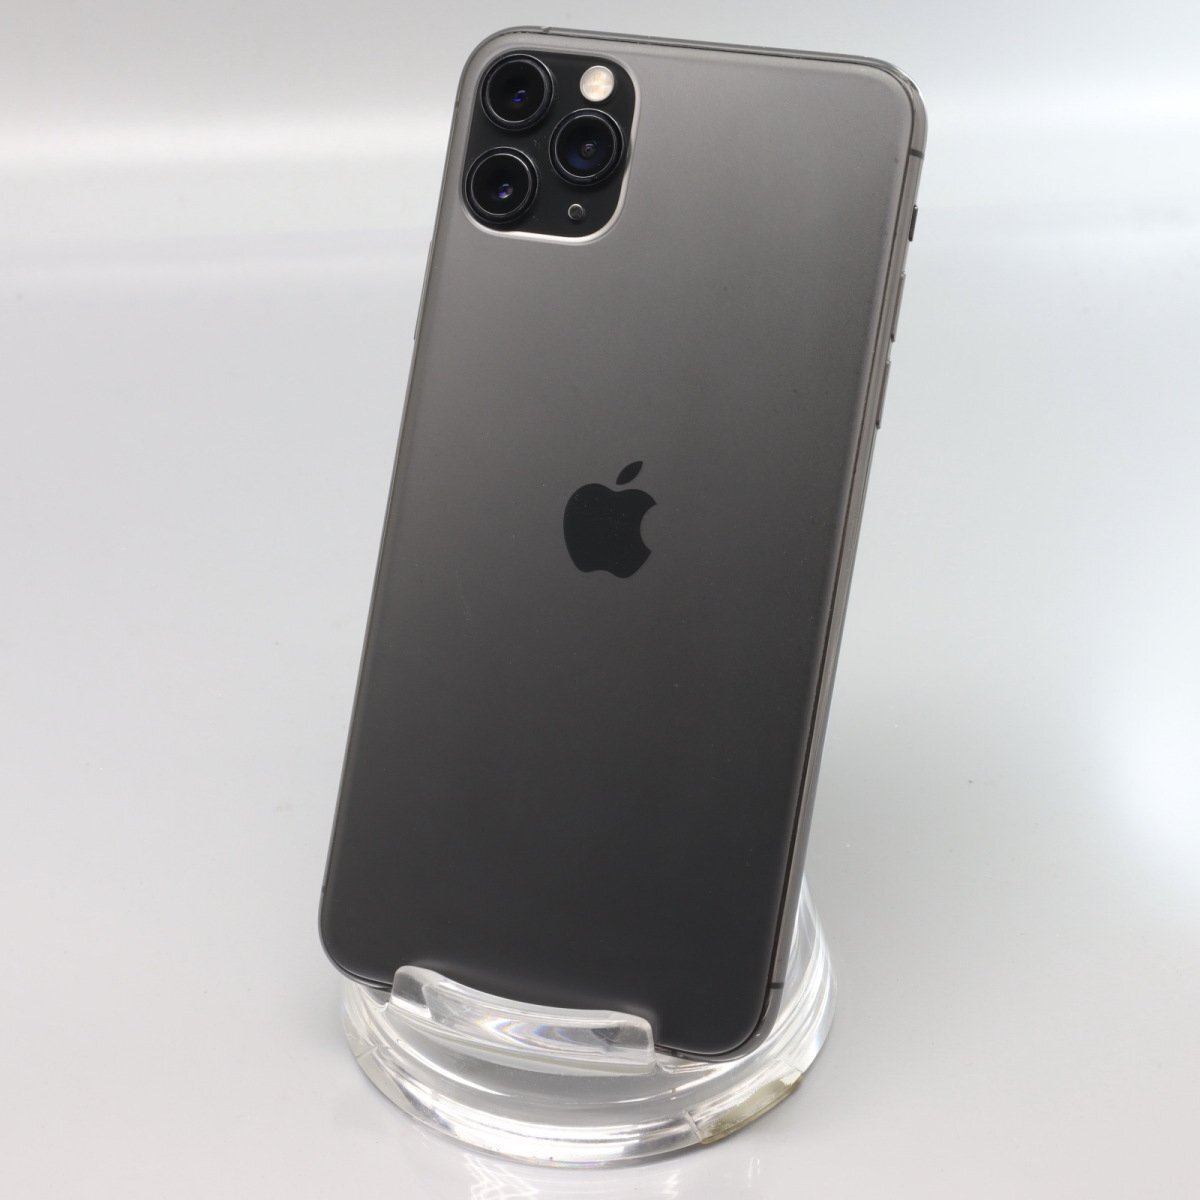 Apple iPhone11 Pro Max 64GB Space Gray A2218 MWHD2J/A バッテリ82% ■ソフトバンク★Joshin5841【1円開始・送料無料】_画像1